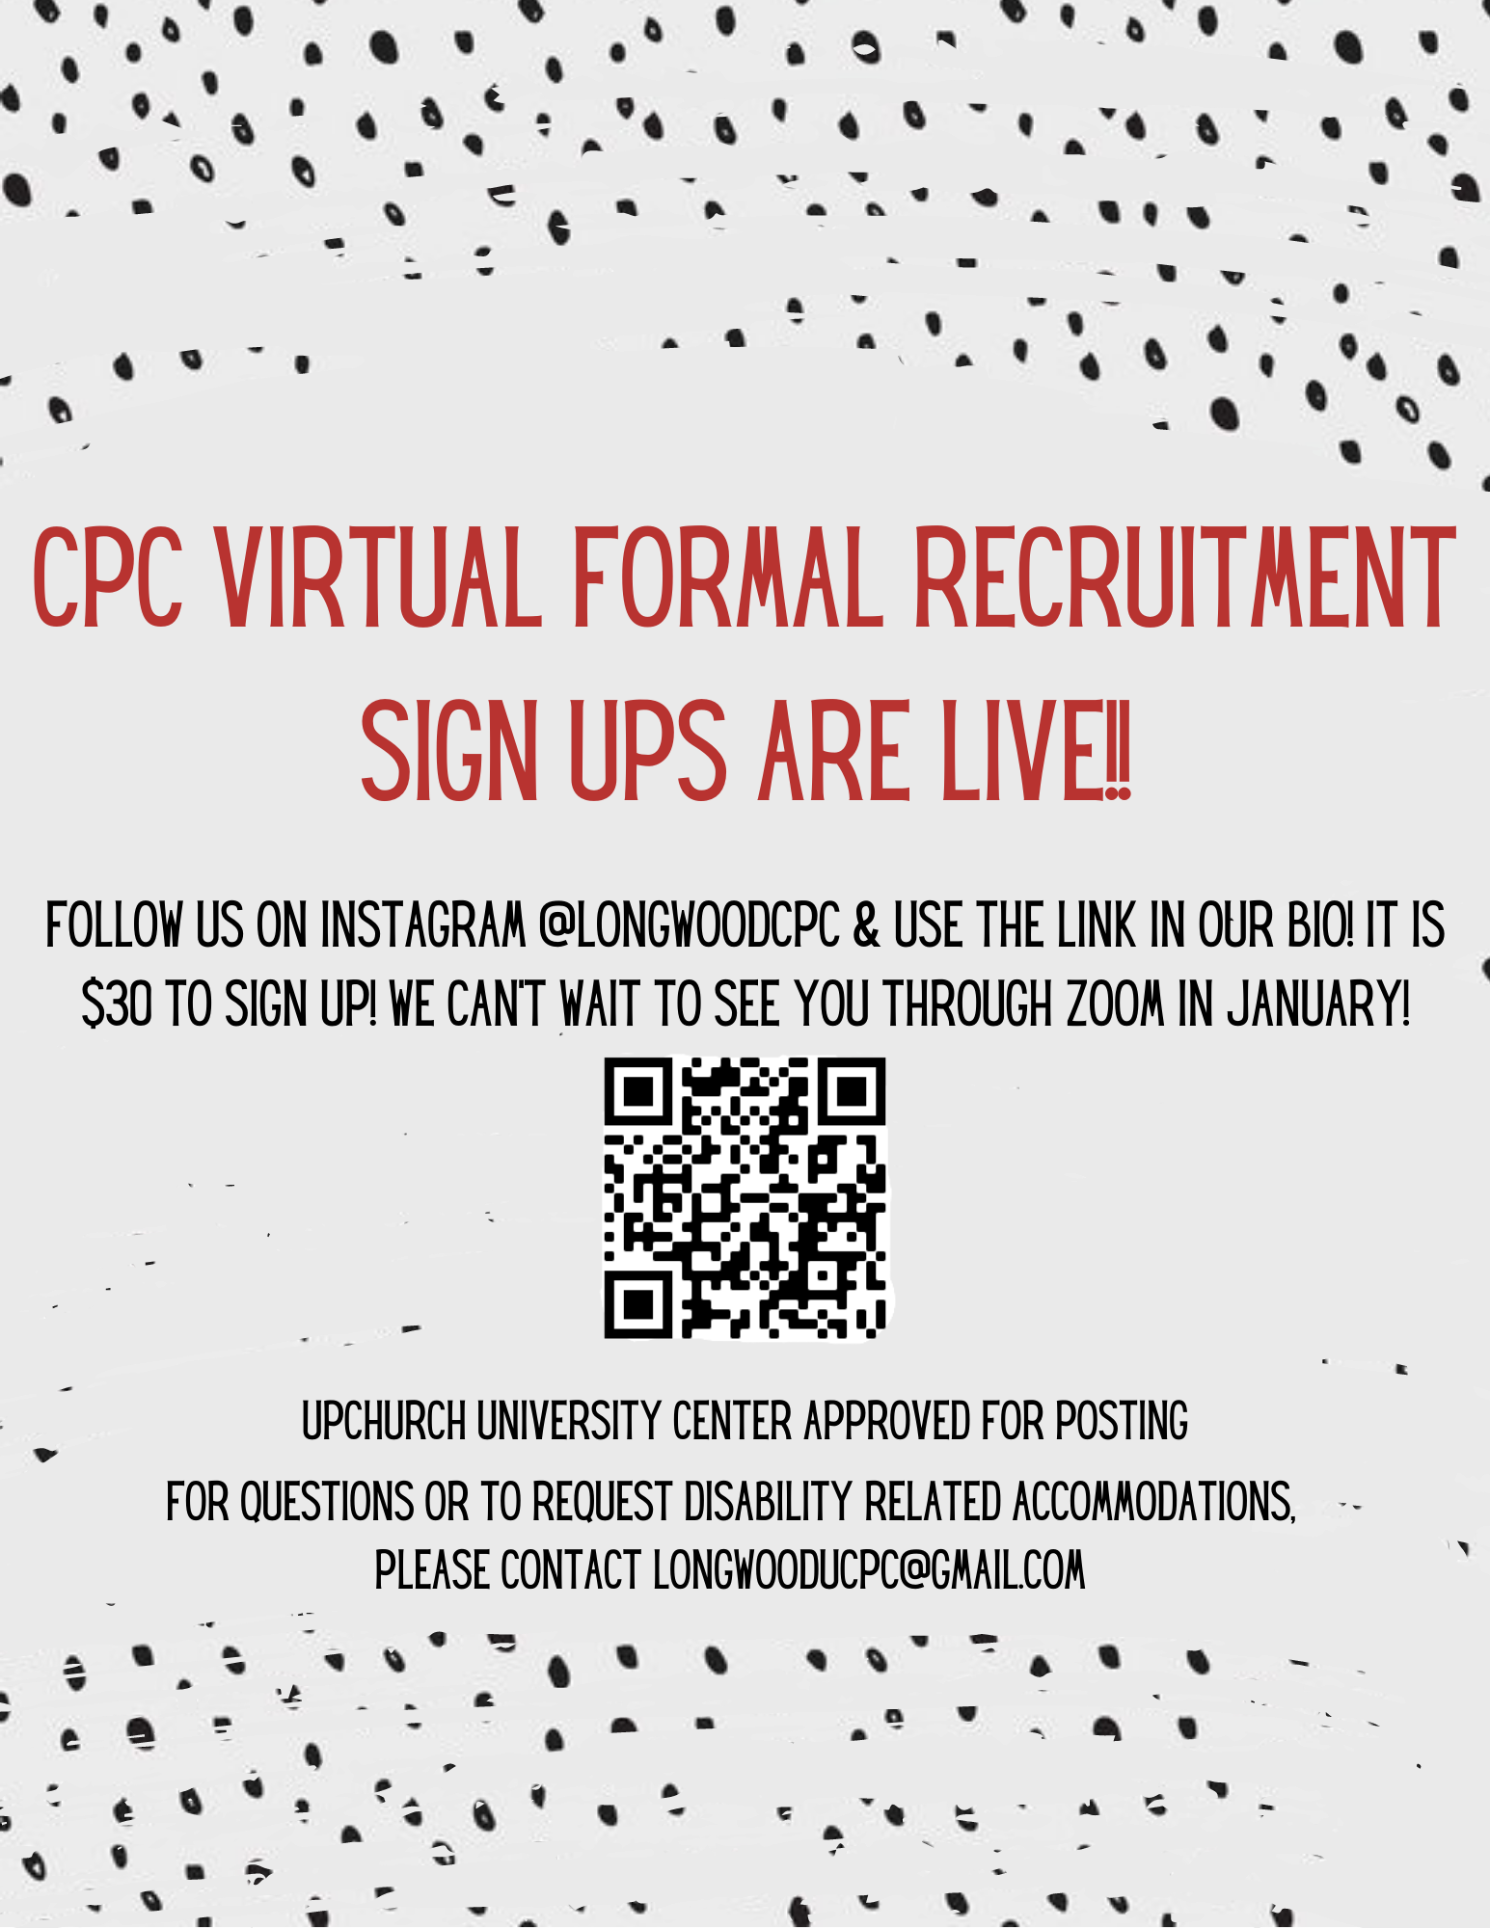 Sign up for formal recruitment. QR code included